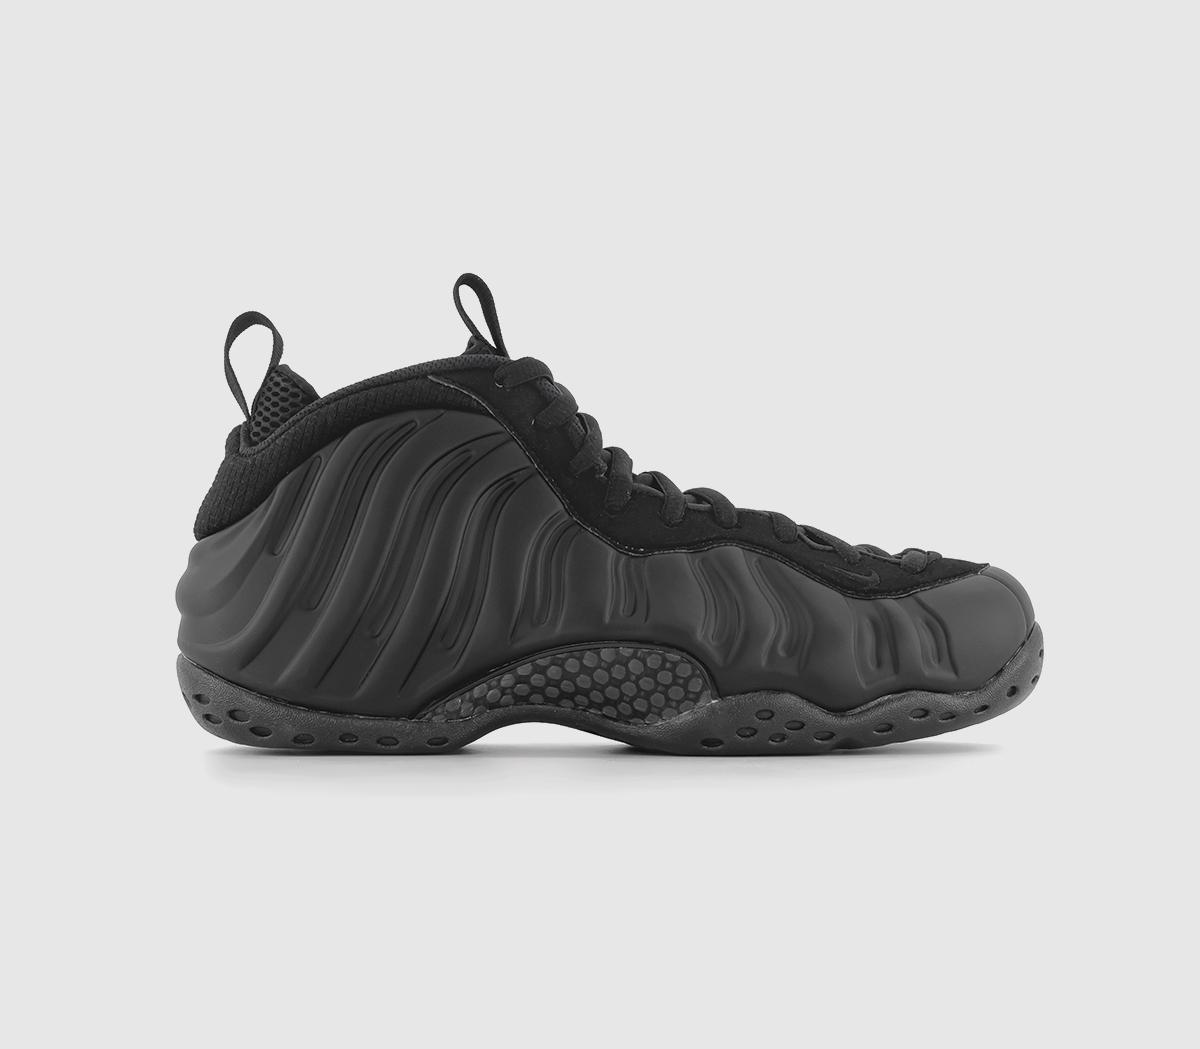 NikeAir Foamposite One Trainers Black Anthracite Black